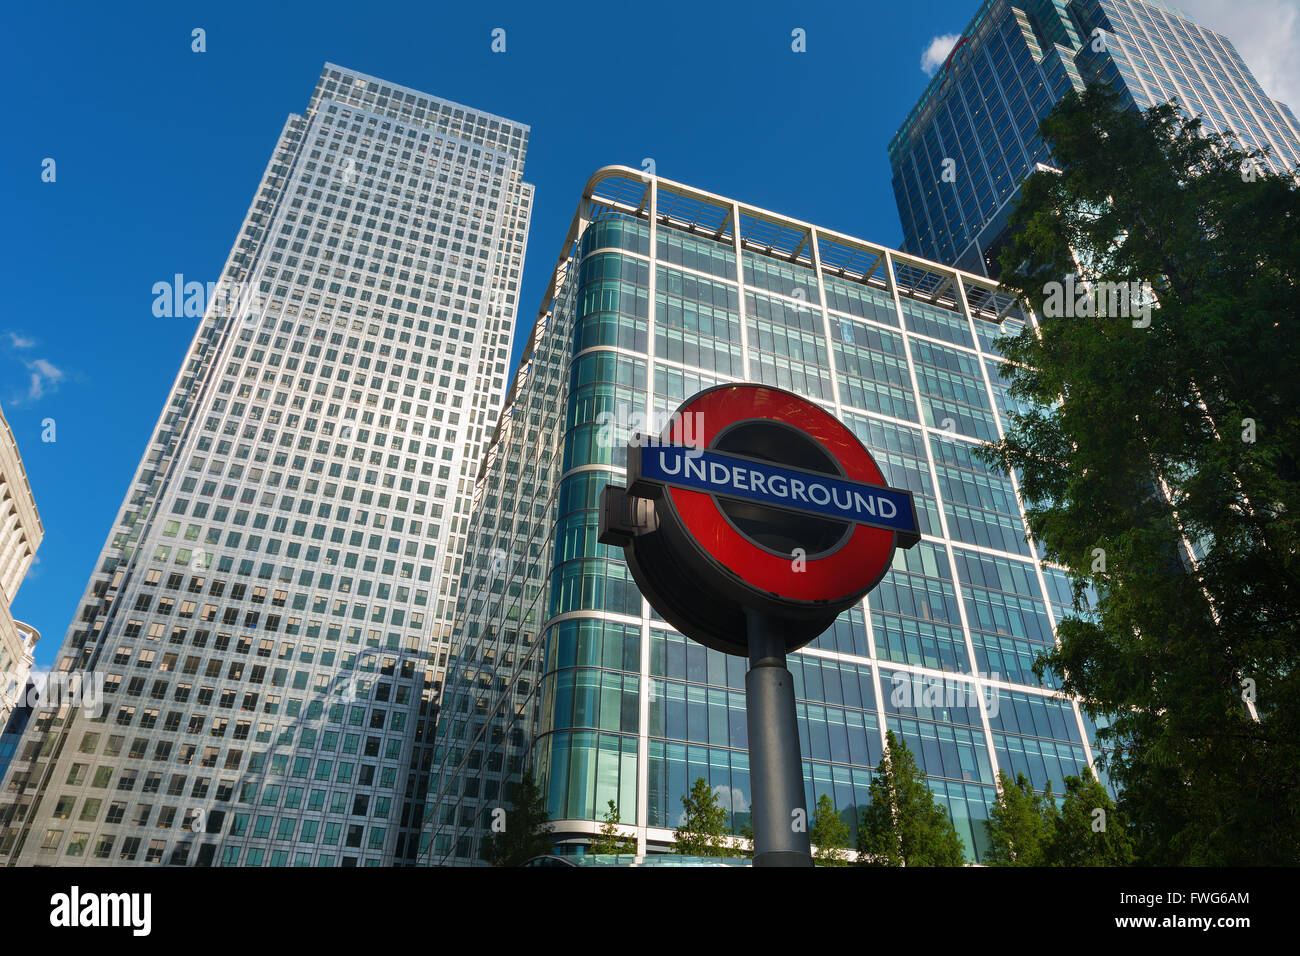 Skyscrapers and London Underground sign at Canary Wharf, Docklands the heart of the financial district of London Stock Photo